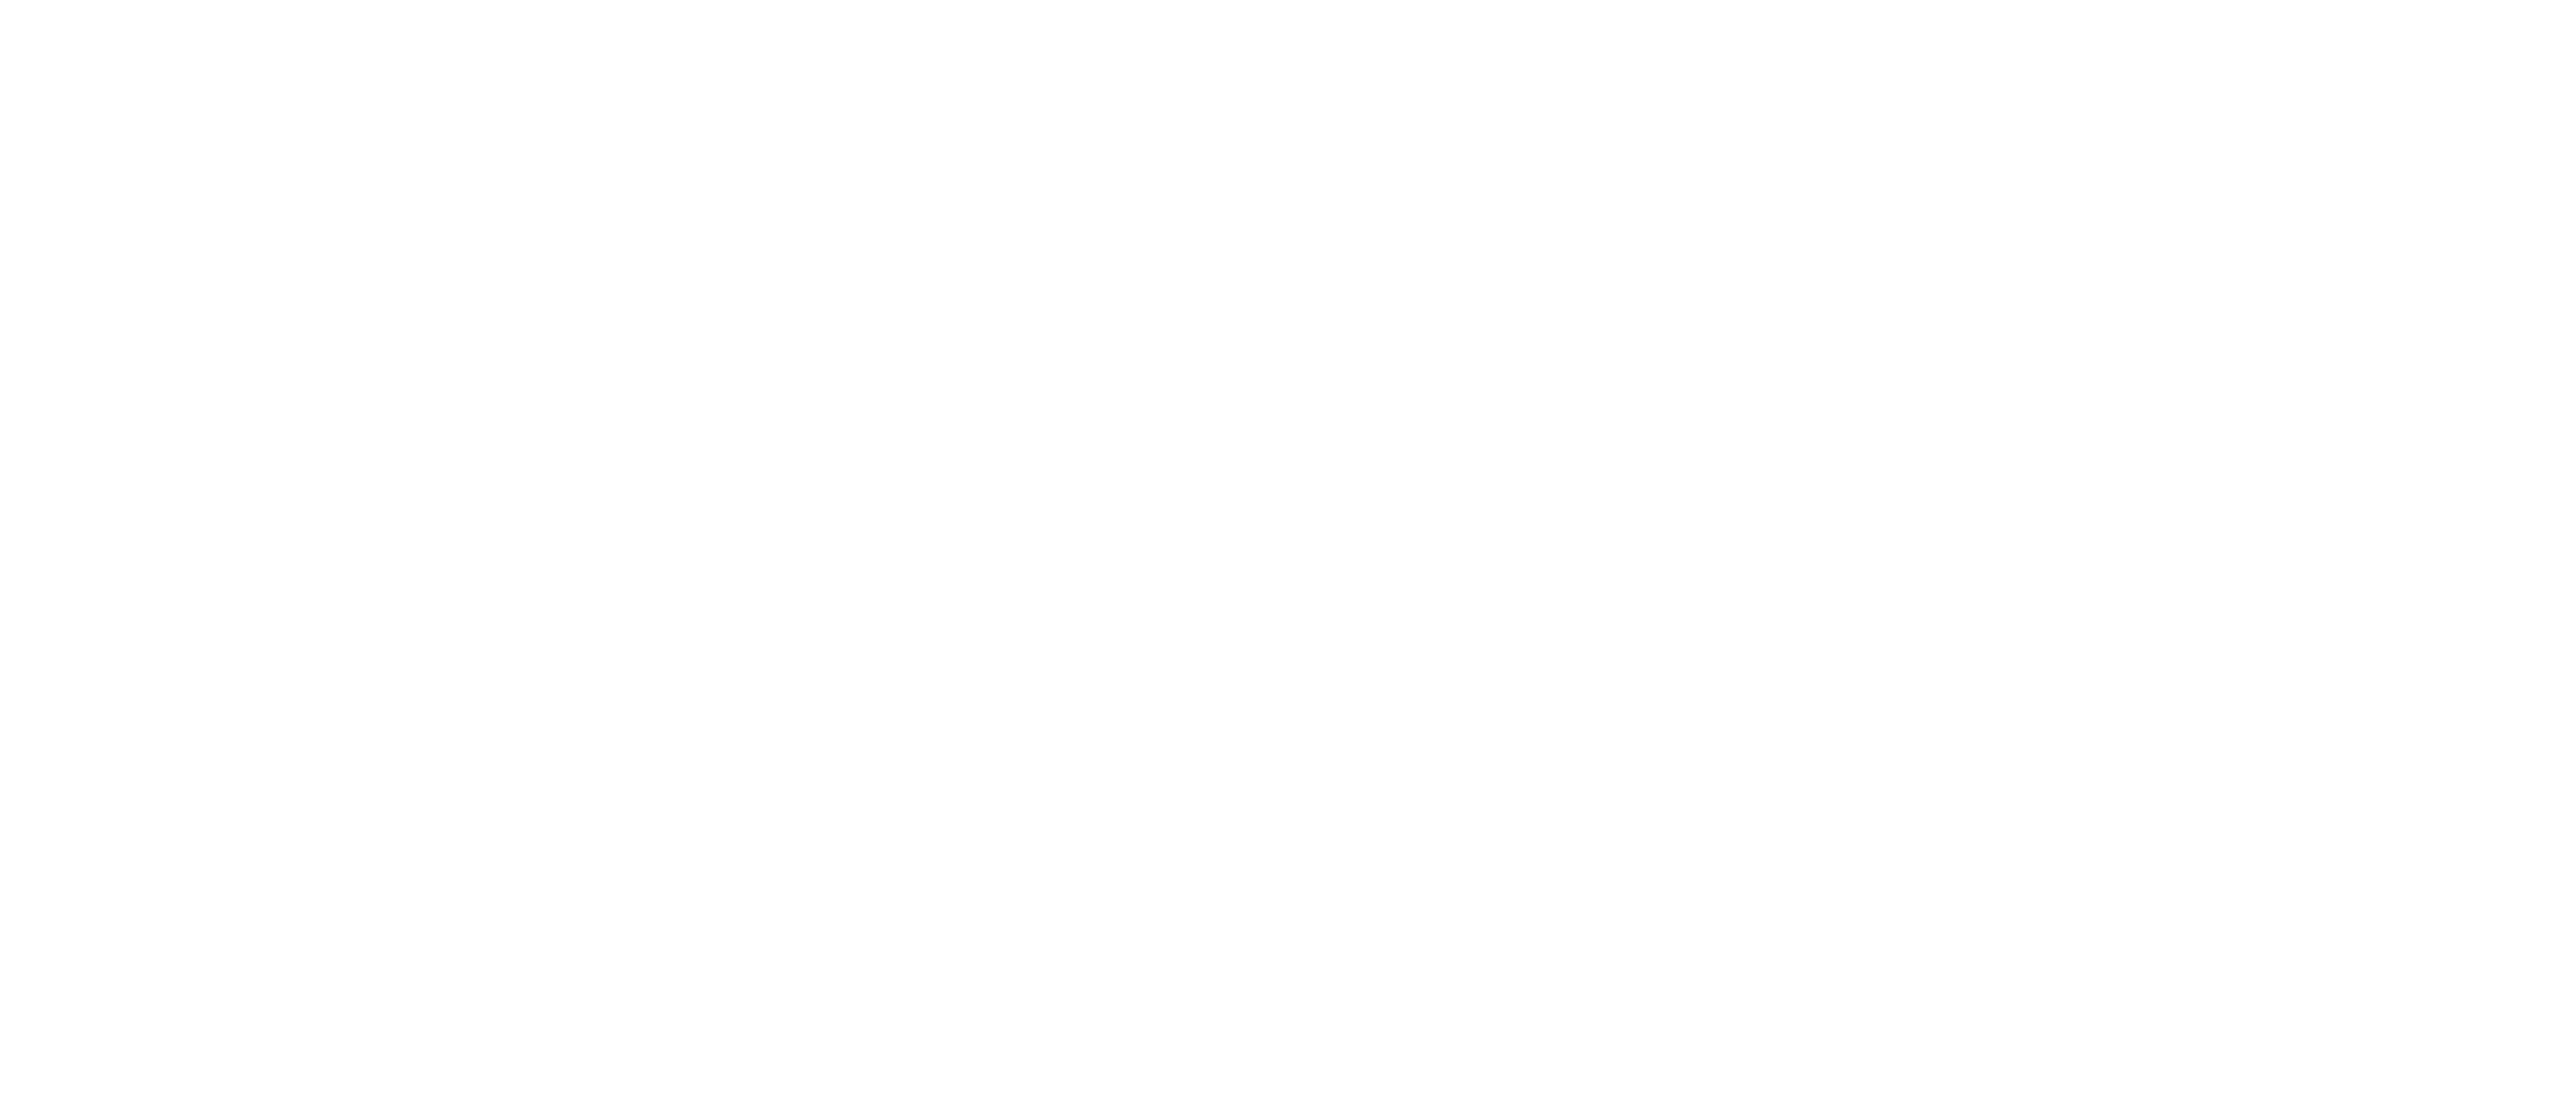 Text saying Any Distance Active Clubs in an arch